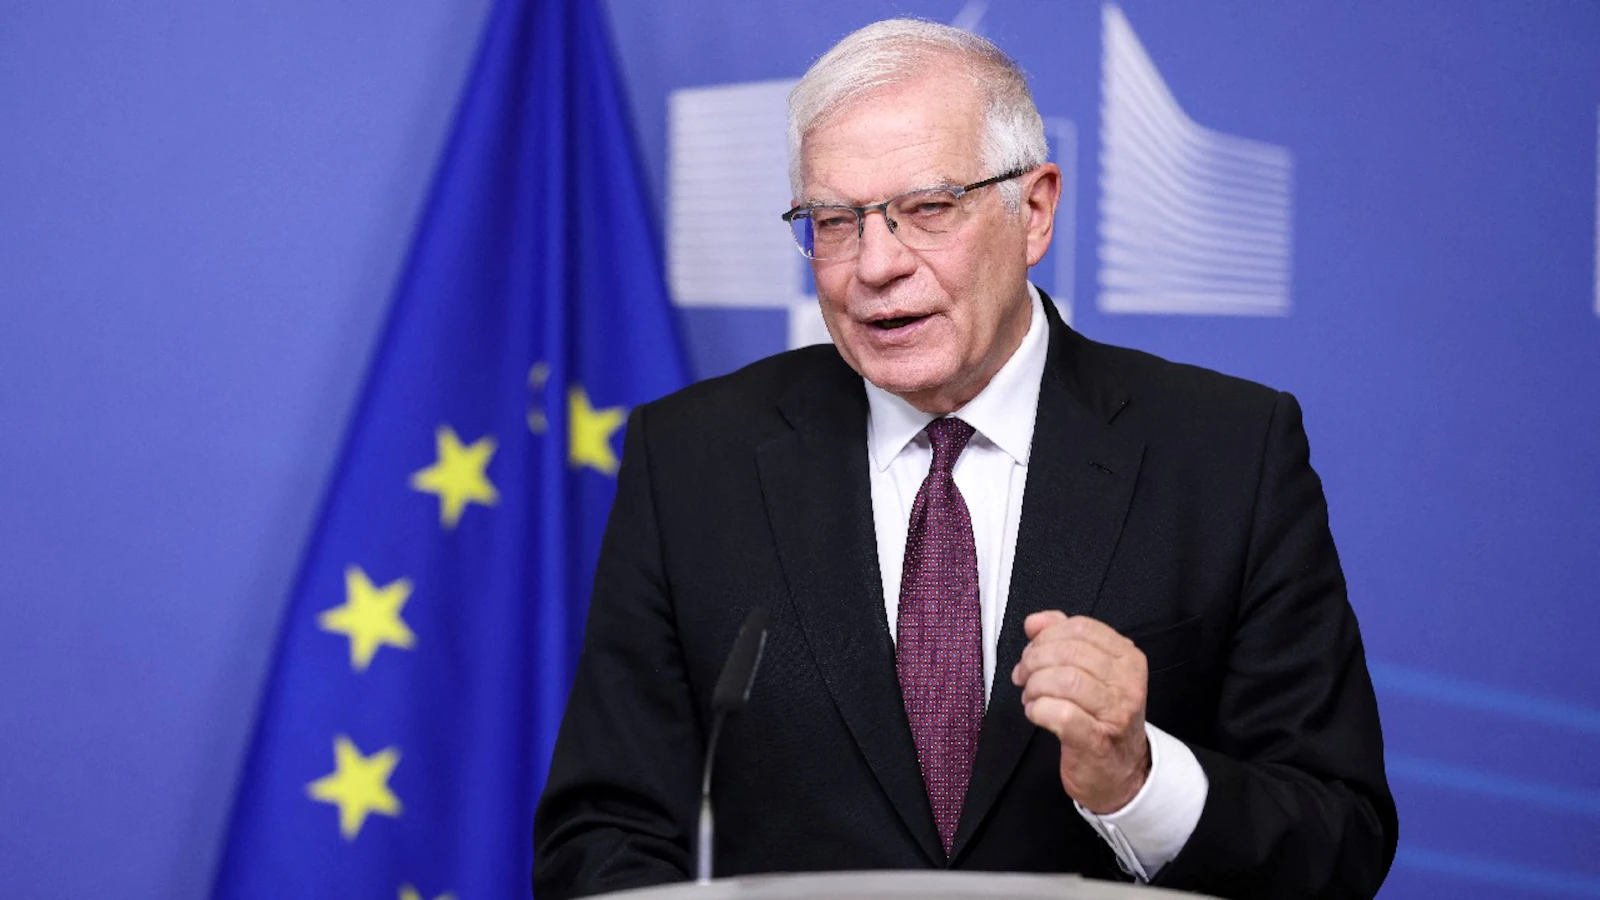 No one is keeping Hungary in the EU: Borrell responds to Orbán